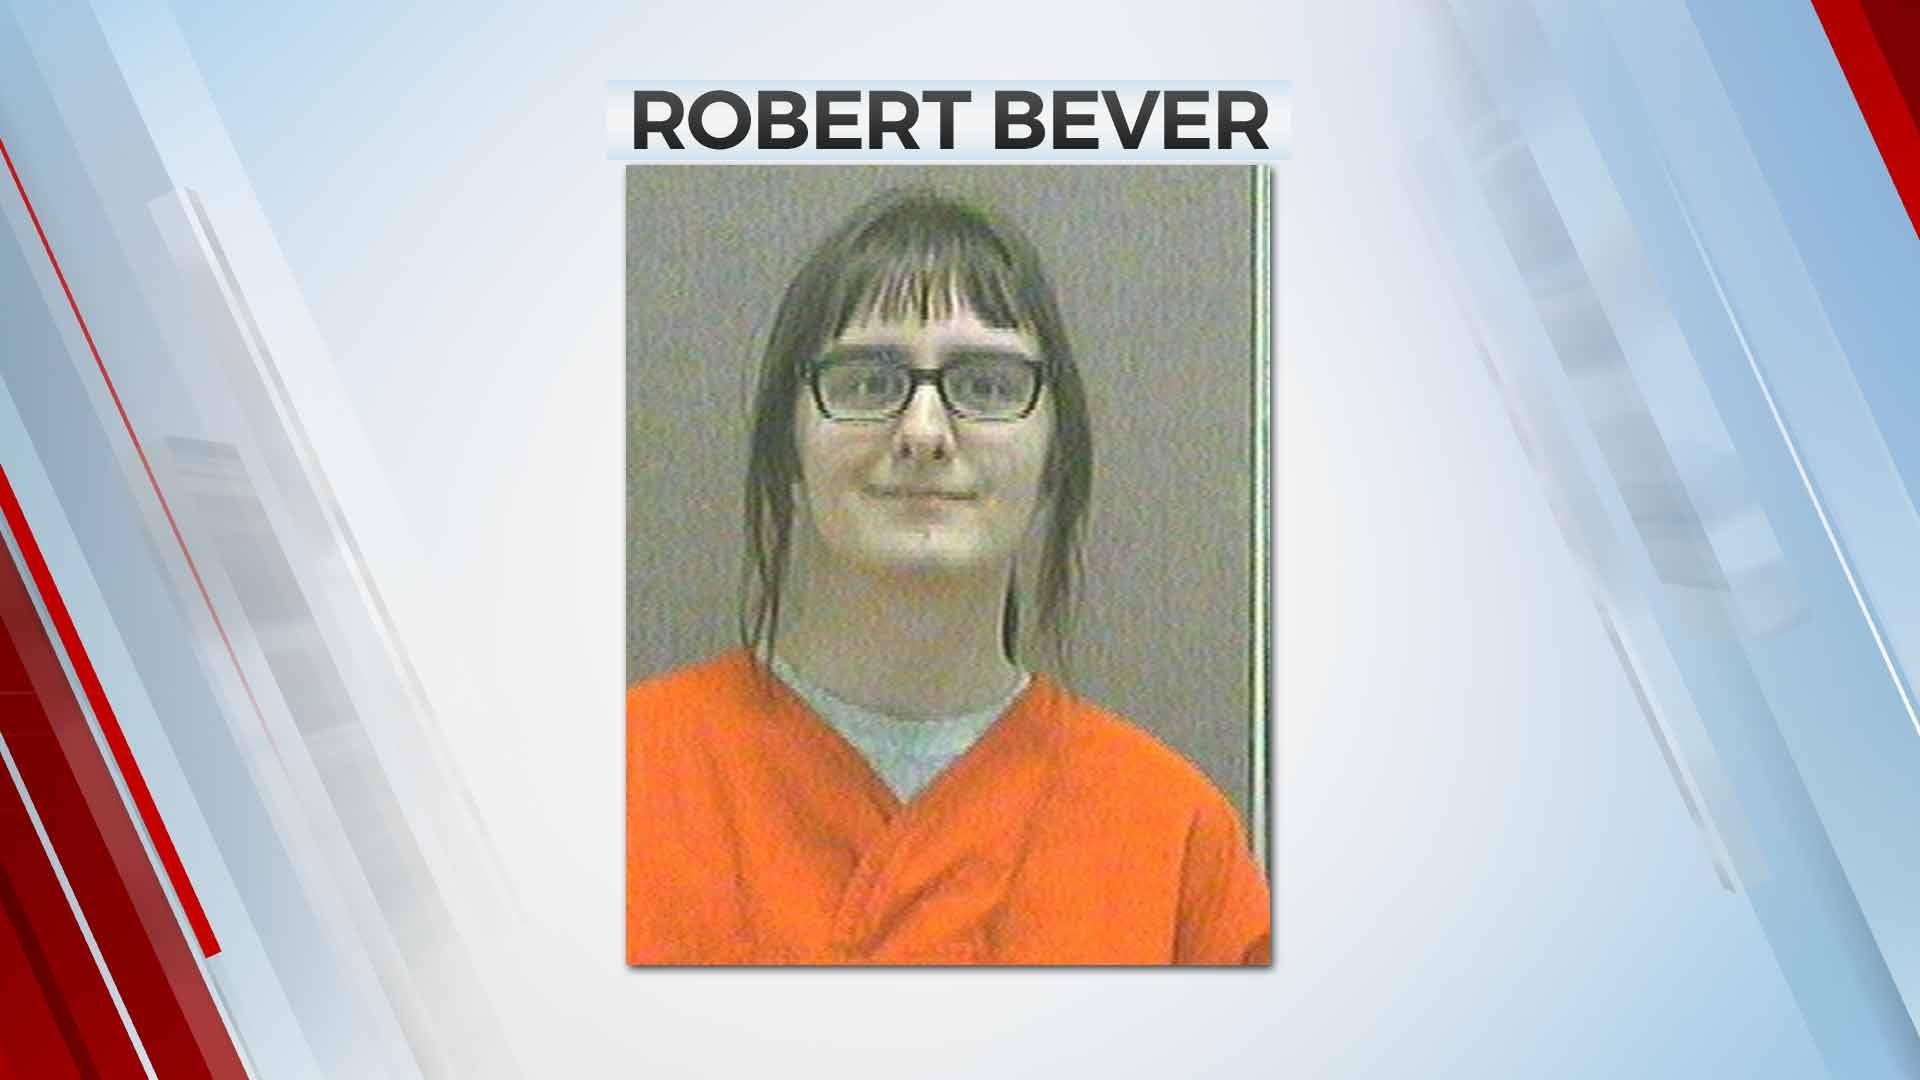 Robert Bever Tries To Attack Prison Staff With 'Sharpened Instrument,' Report States